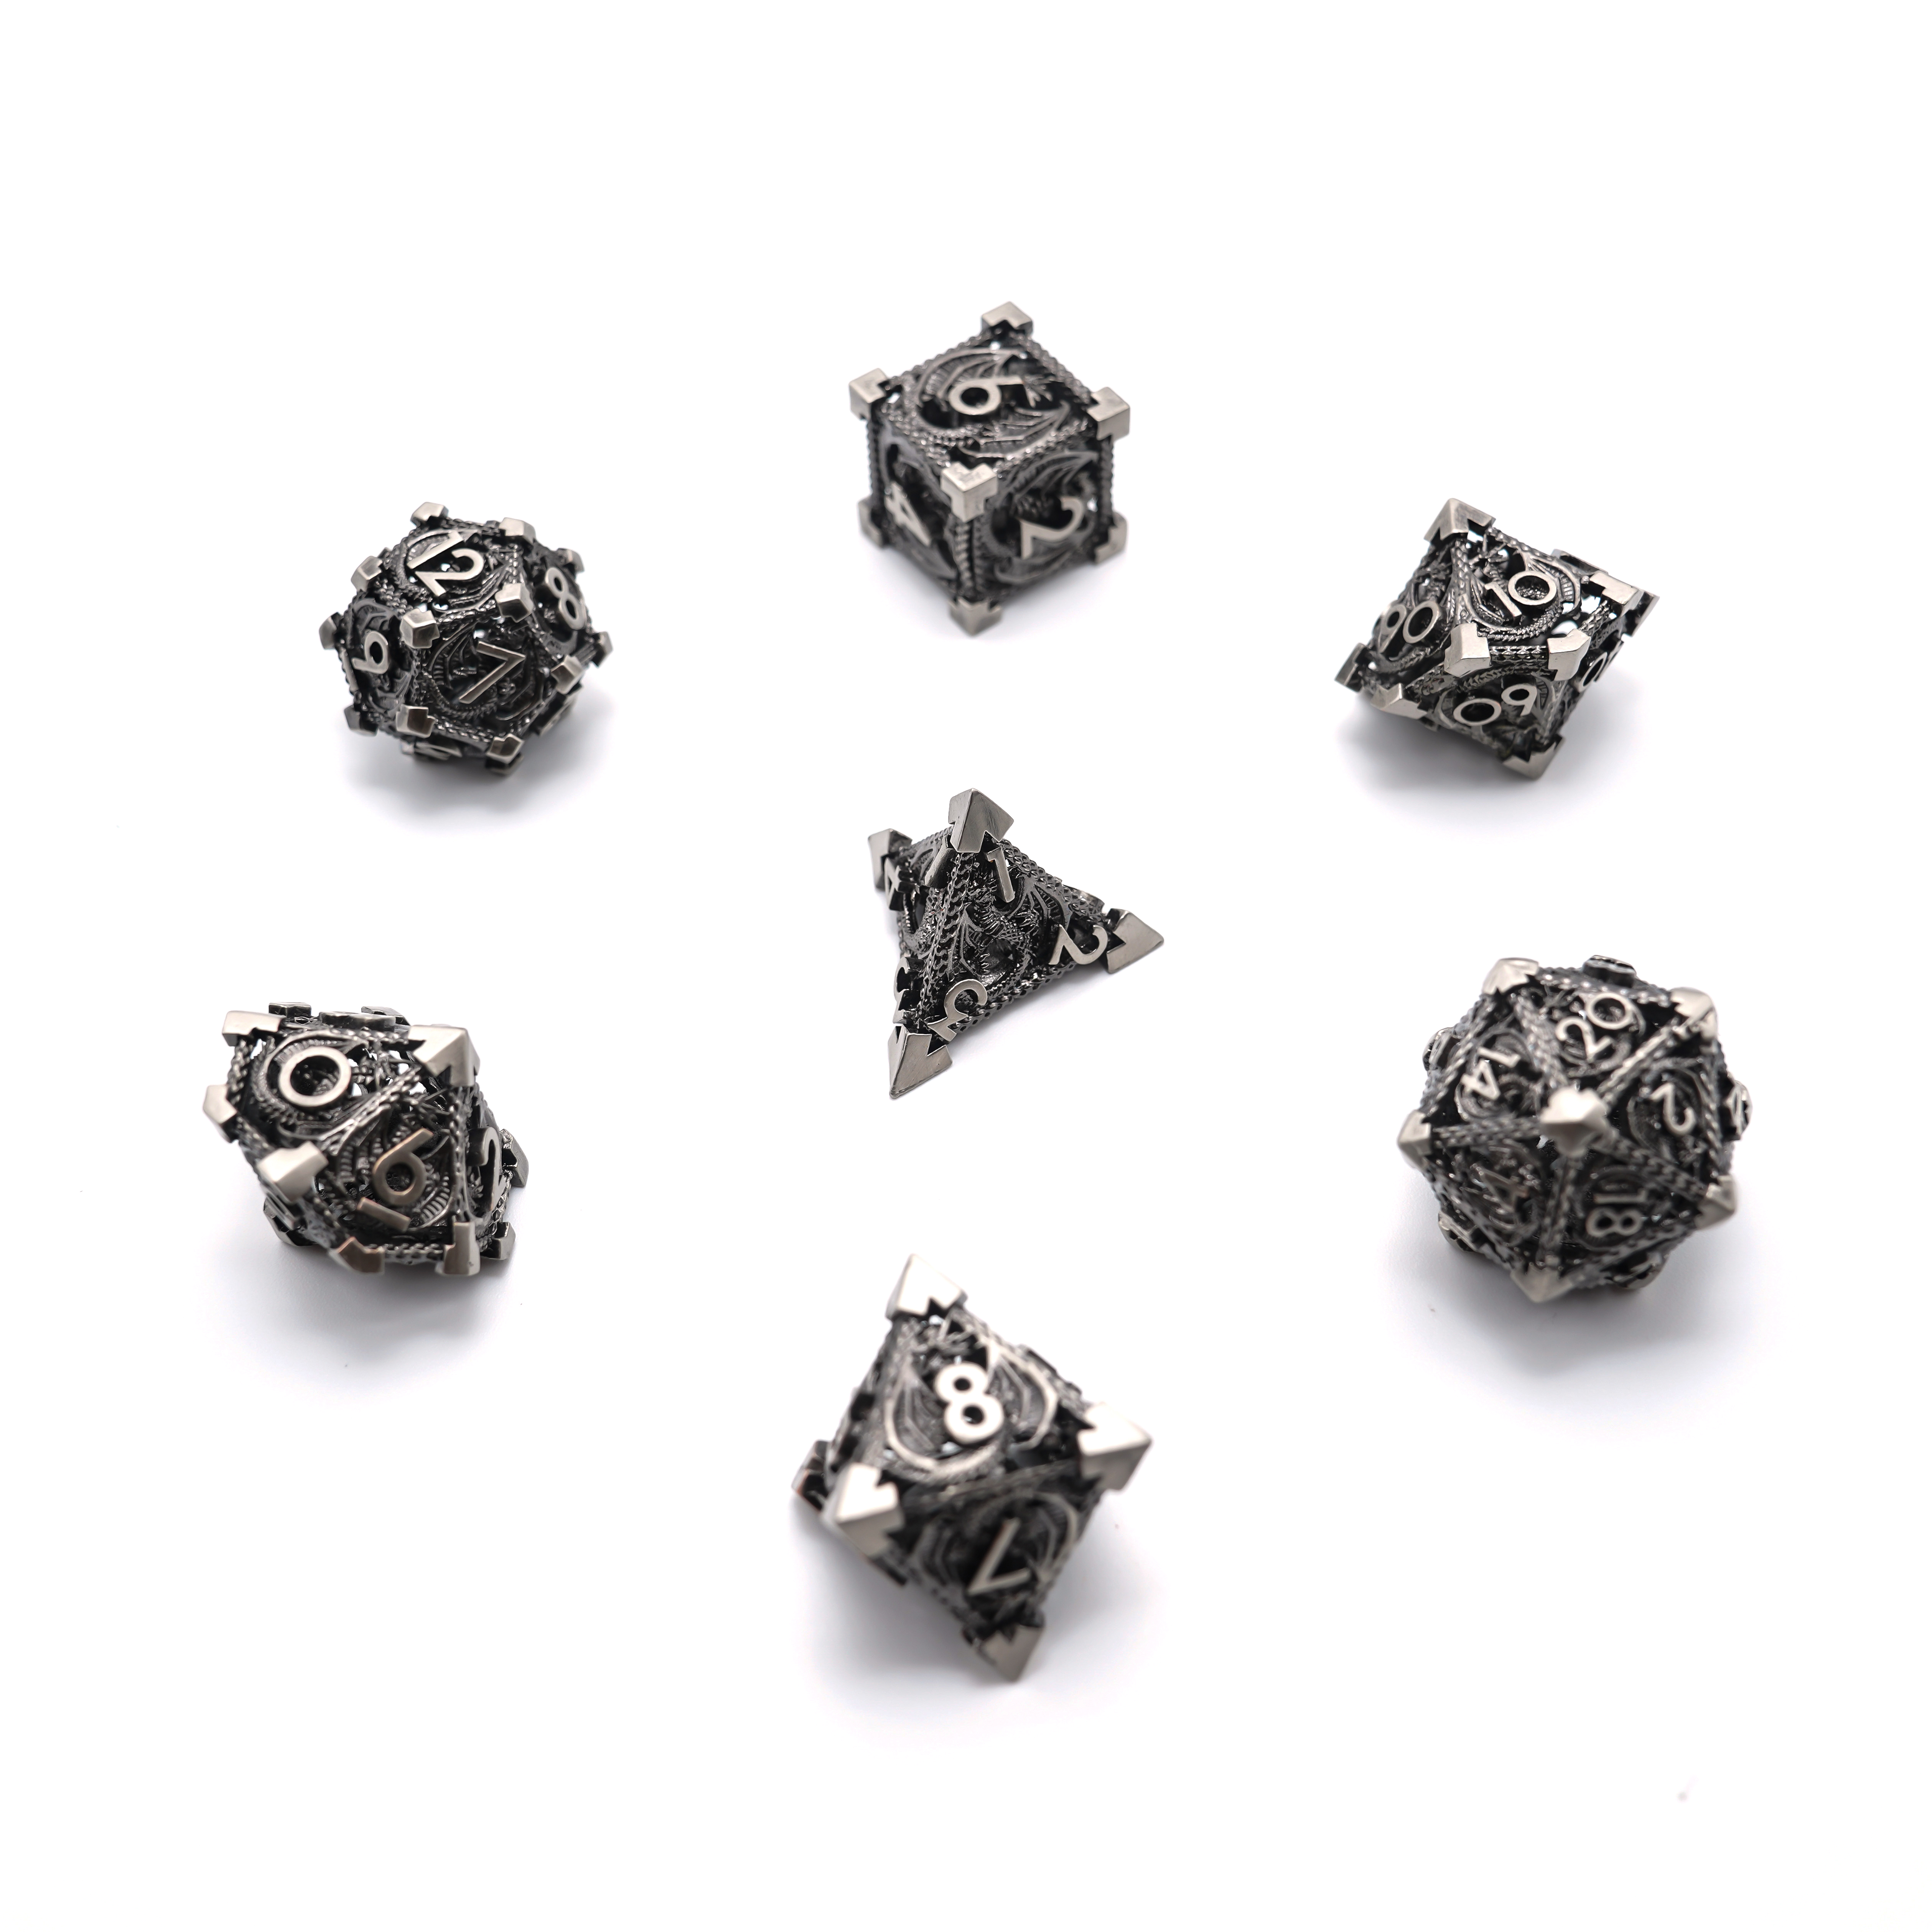 Check Out These Hollow Metal Dice — GeekTyrant